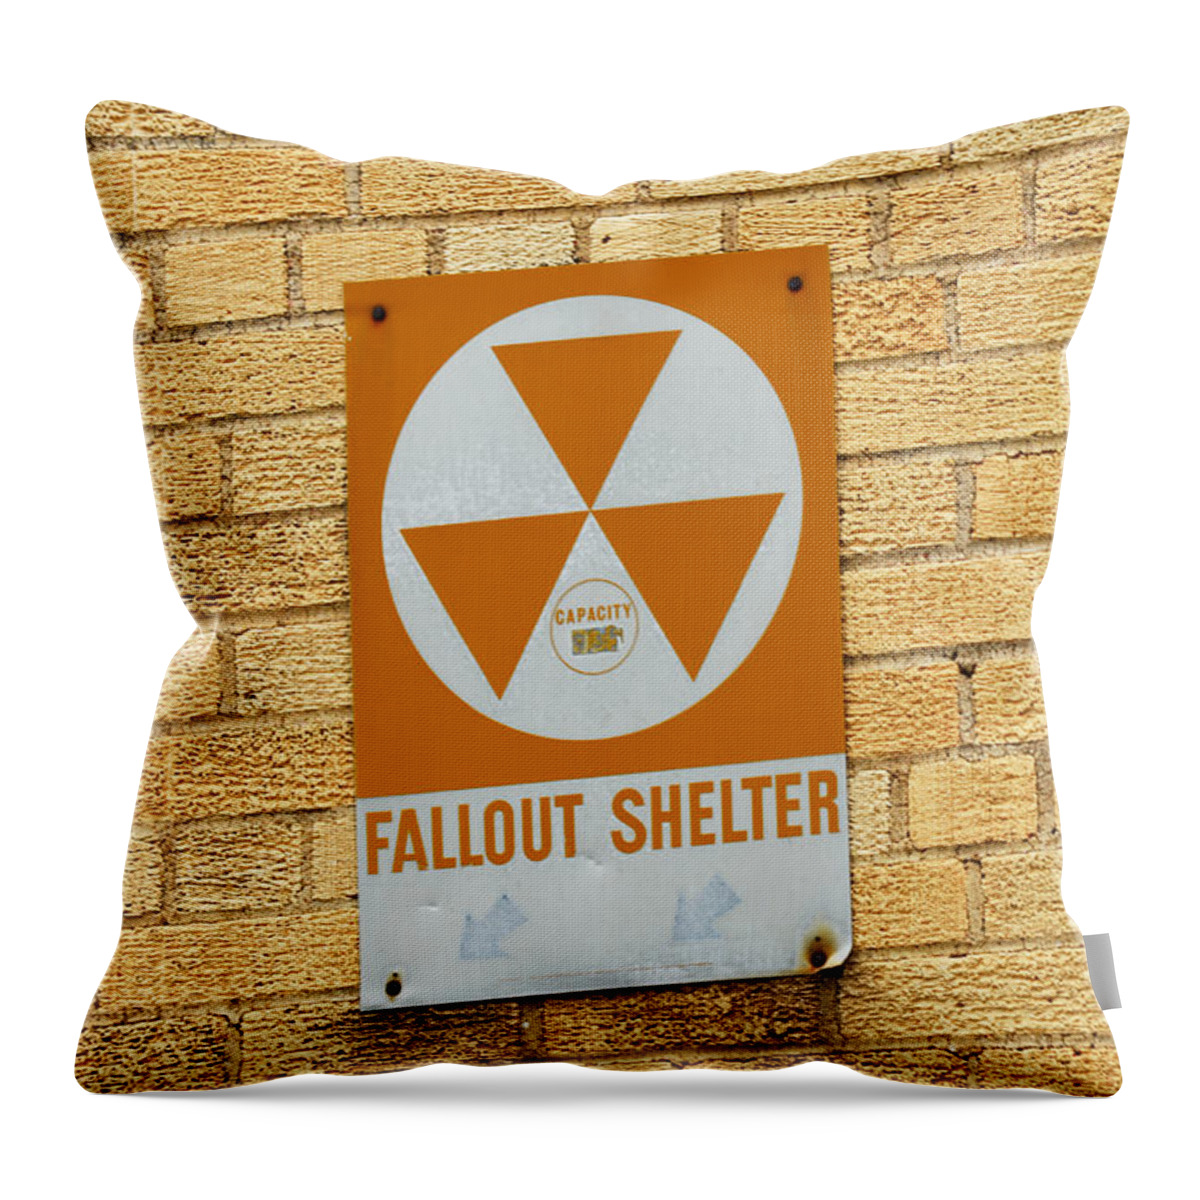 Fallout Shelter Throw Pillow featuring the photograph Fallout Shelter by Nikki Smith